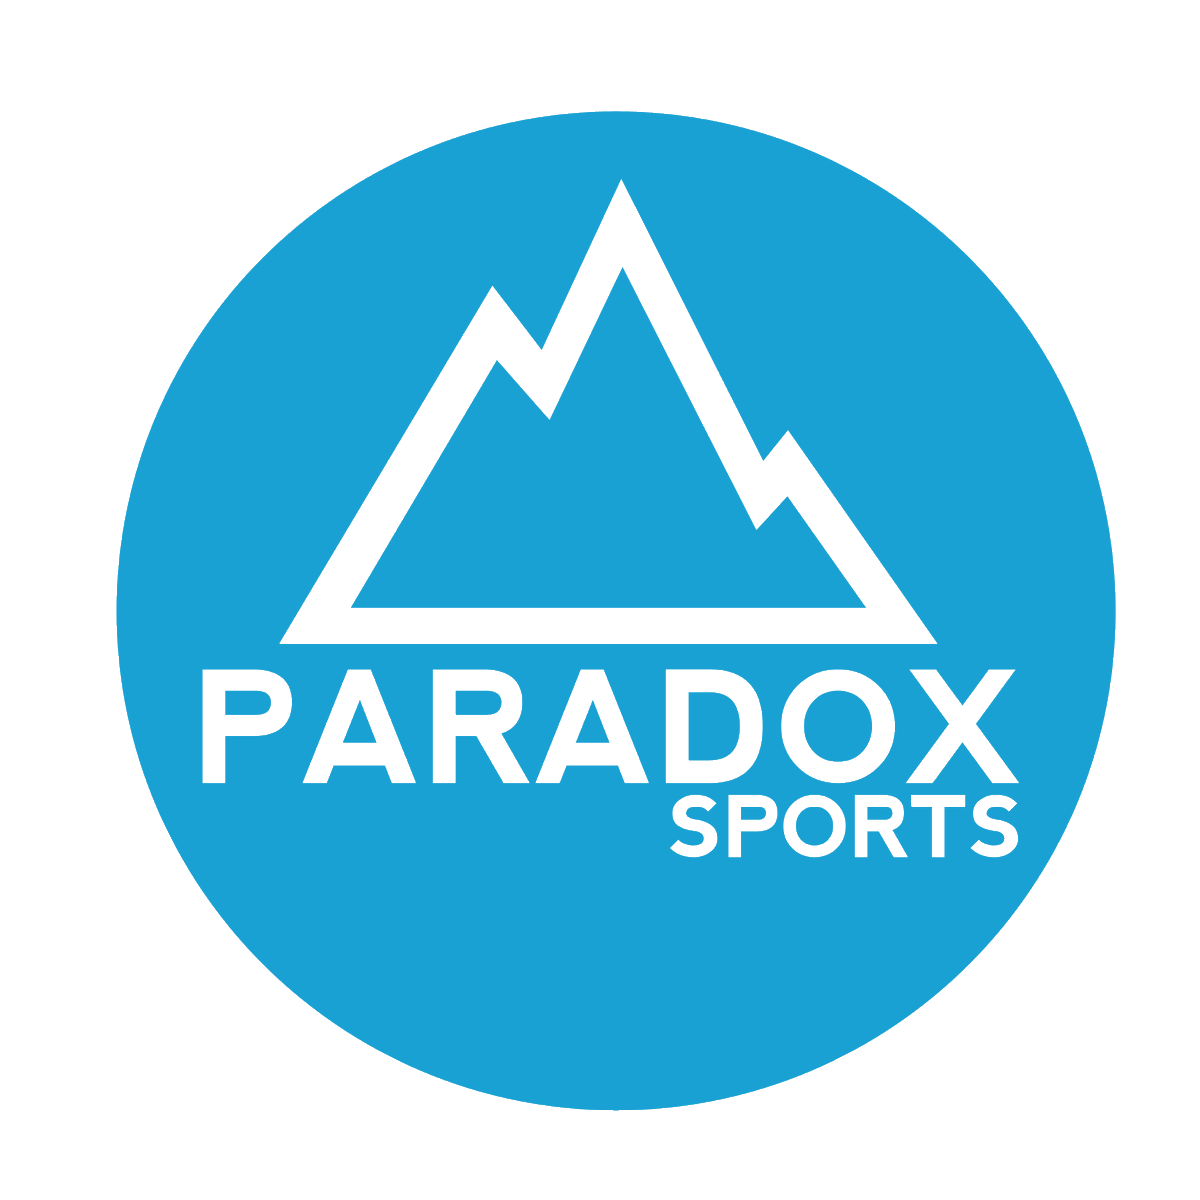 Coming up next weekend, @paradoxsports has run an adaptive ice climbing program in Ouray, Colorado for over ten years and this year it is being made possible by Dralla Foundation!🧗🏻‍♂️ #Drallagrant #unforgettableday #climbing #adaptiveclimbing #iceclimbing #OurayCO